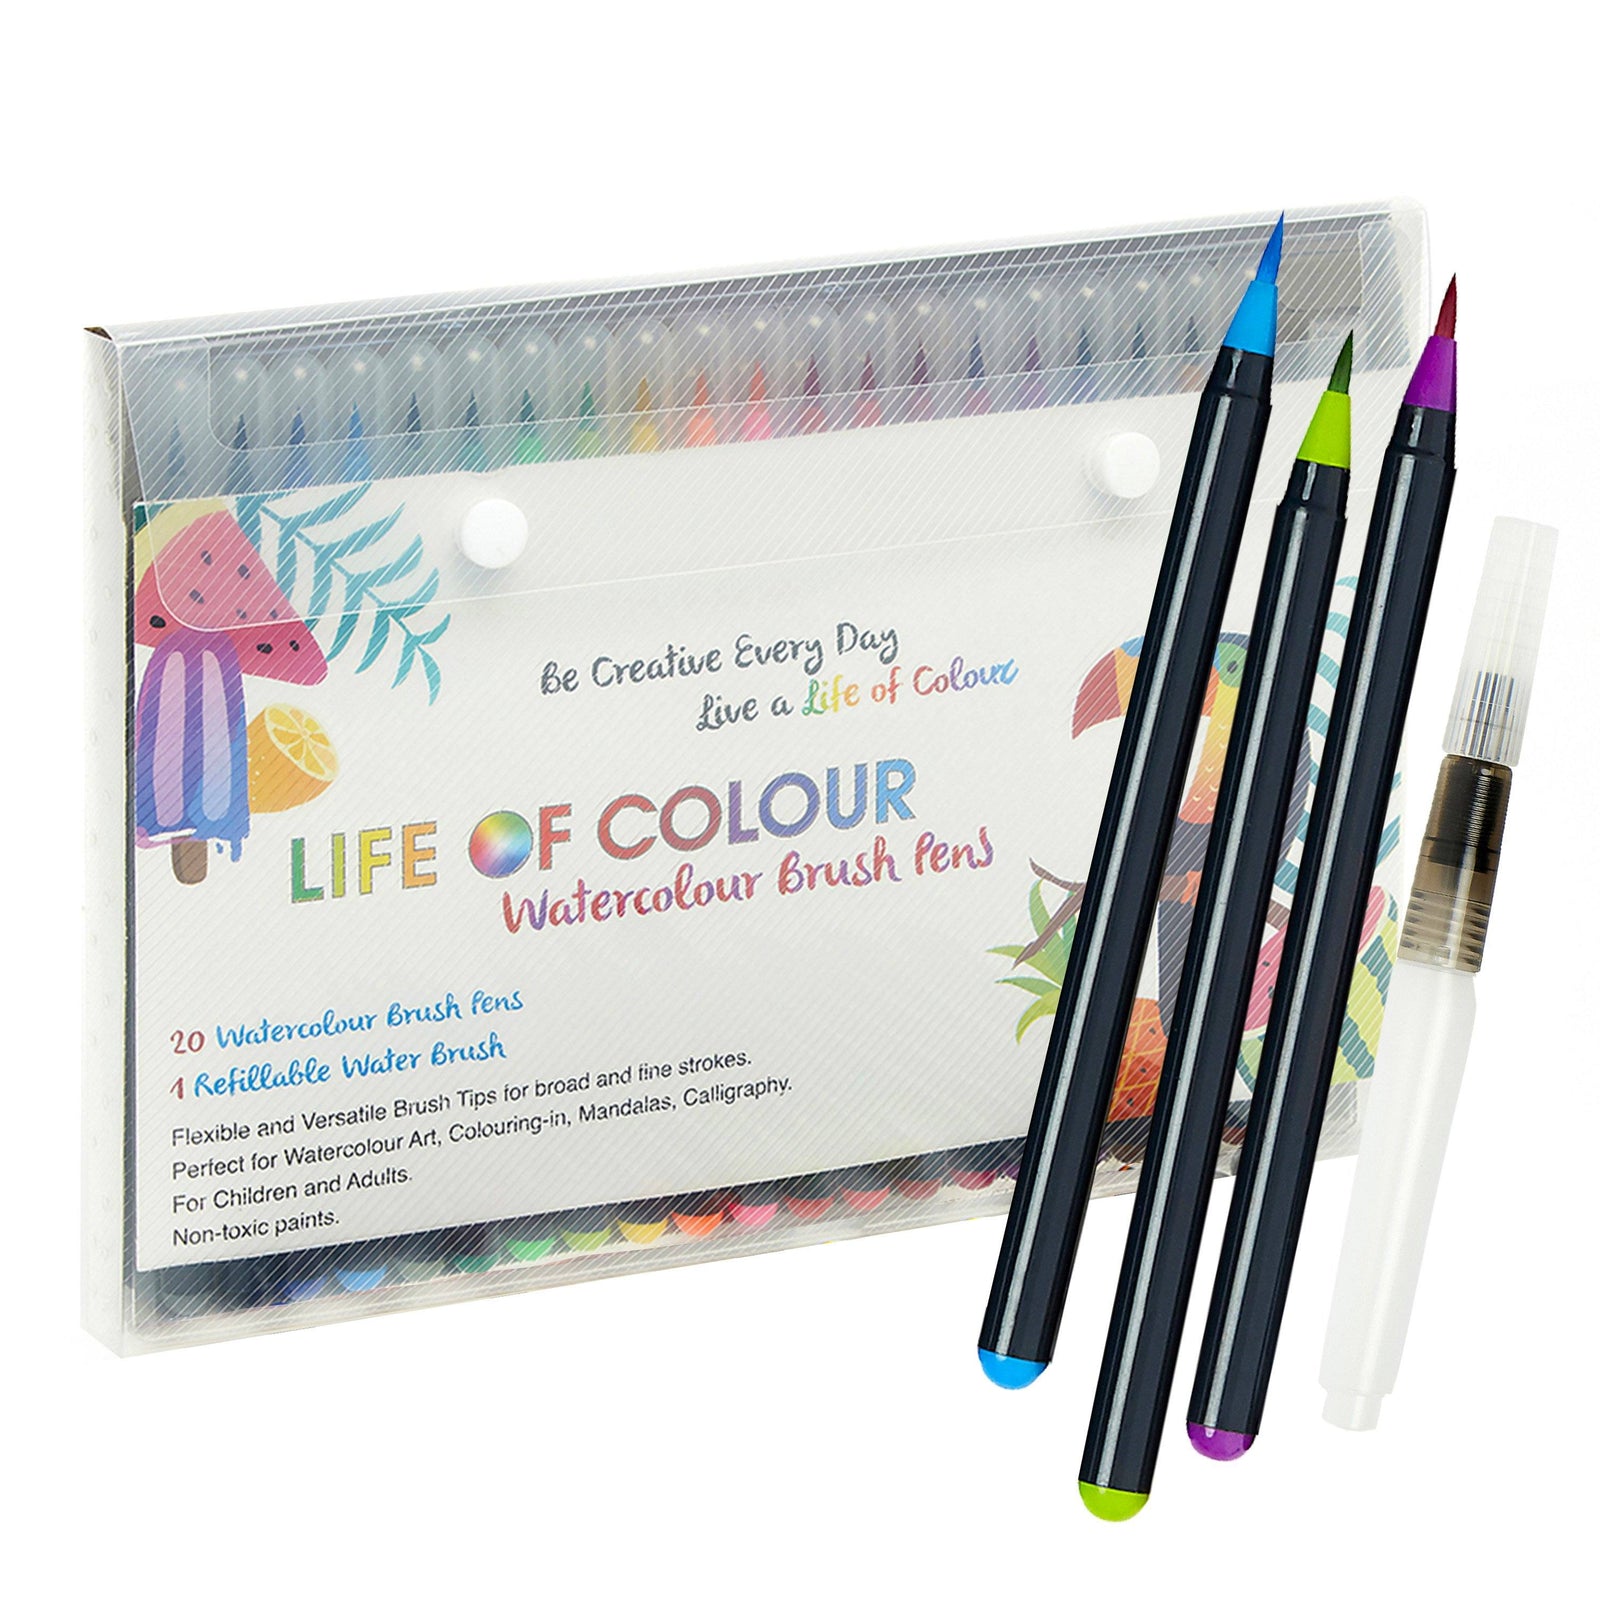 Acrylic Markers set of 24 for kids to use on nature